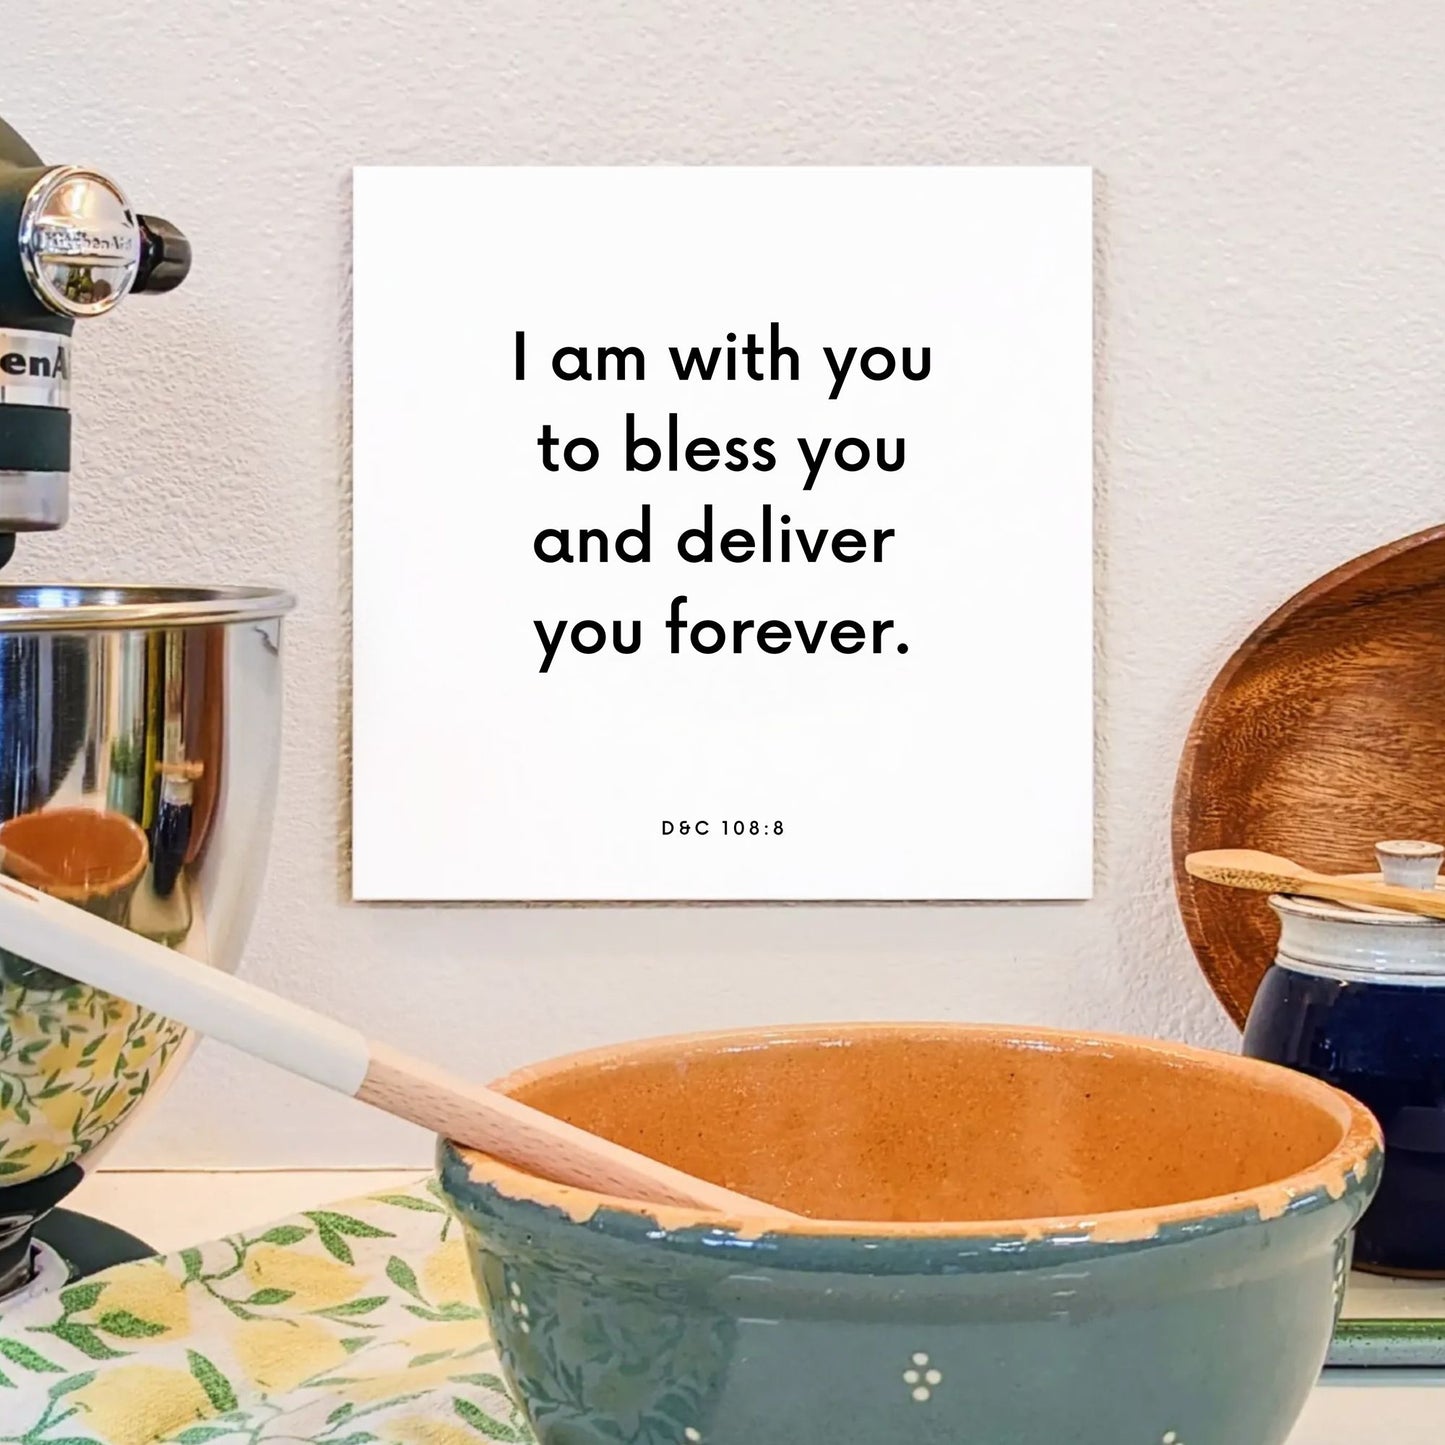 Kitchen mouting of the scripture tile for D&C 108:8 - "I am with you to bless you and deliver you forever"